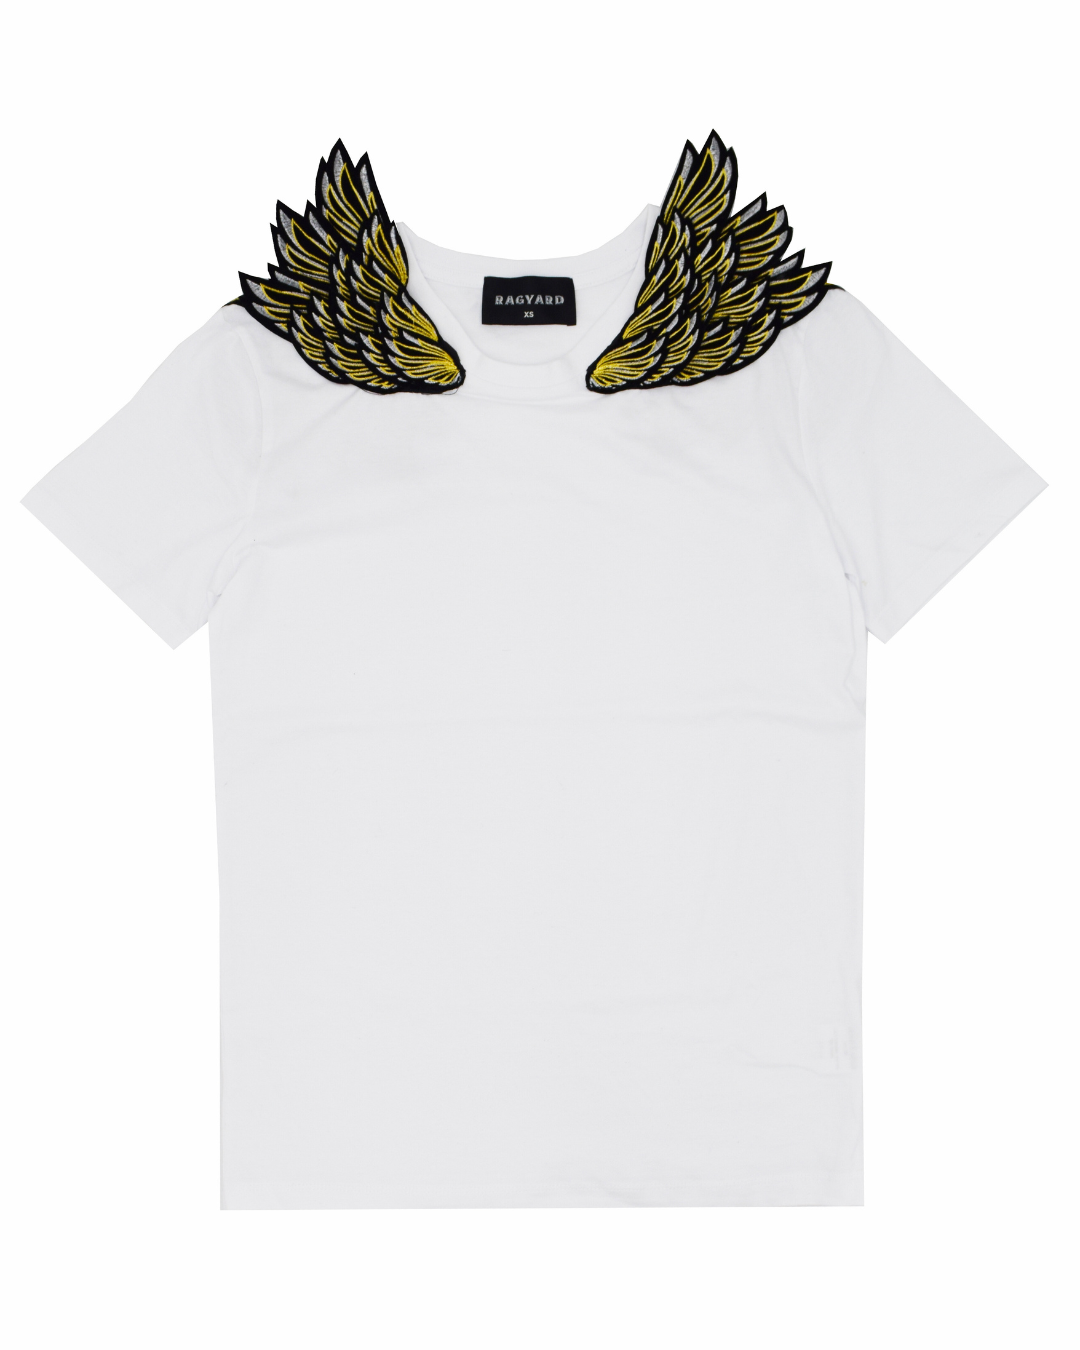 Golden Wing Patch Tshirt